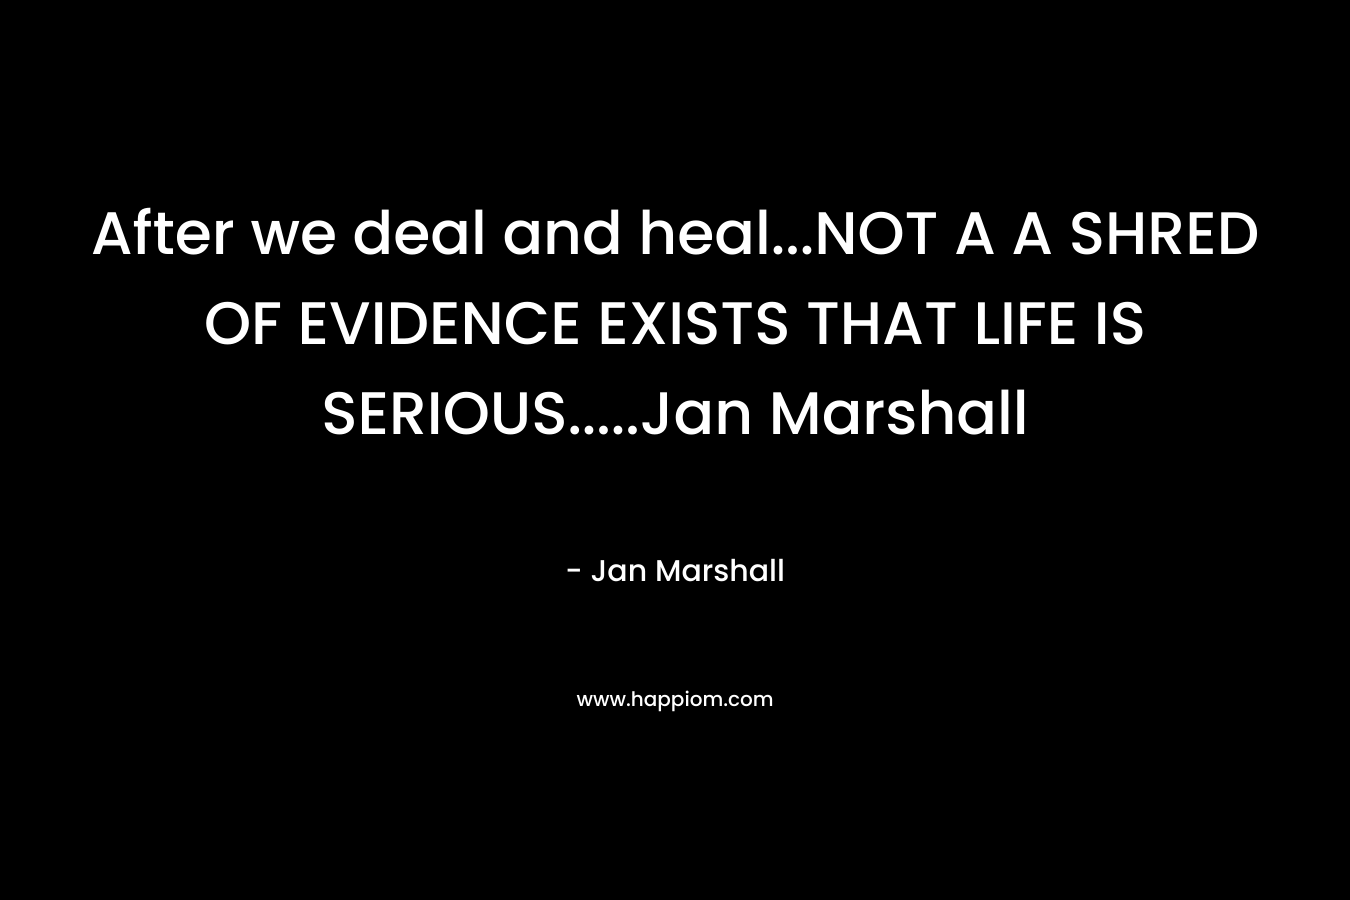 After we deal and heal...NOT A A SHRED OF EVIDENCE EXISTS THAT LIFE IS SERIOUS.....Jan Marshall